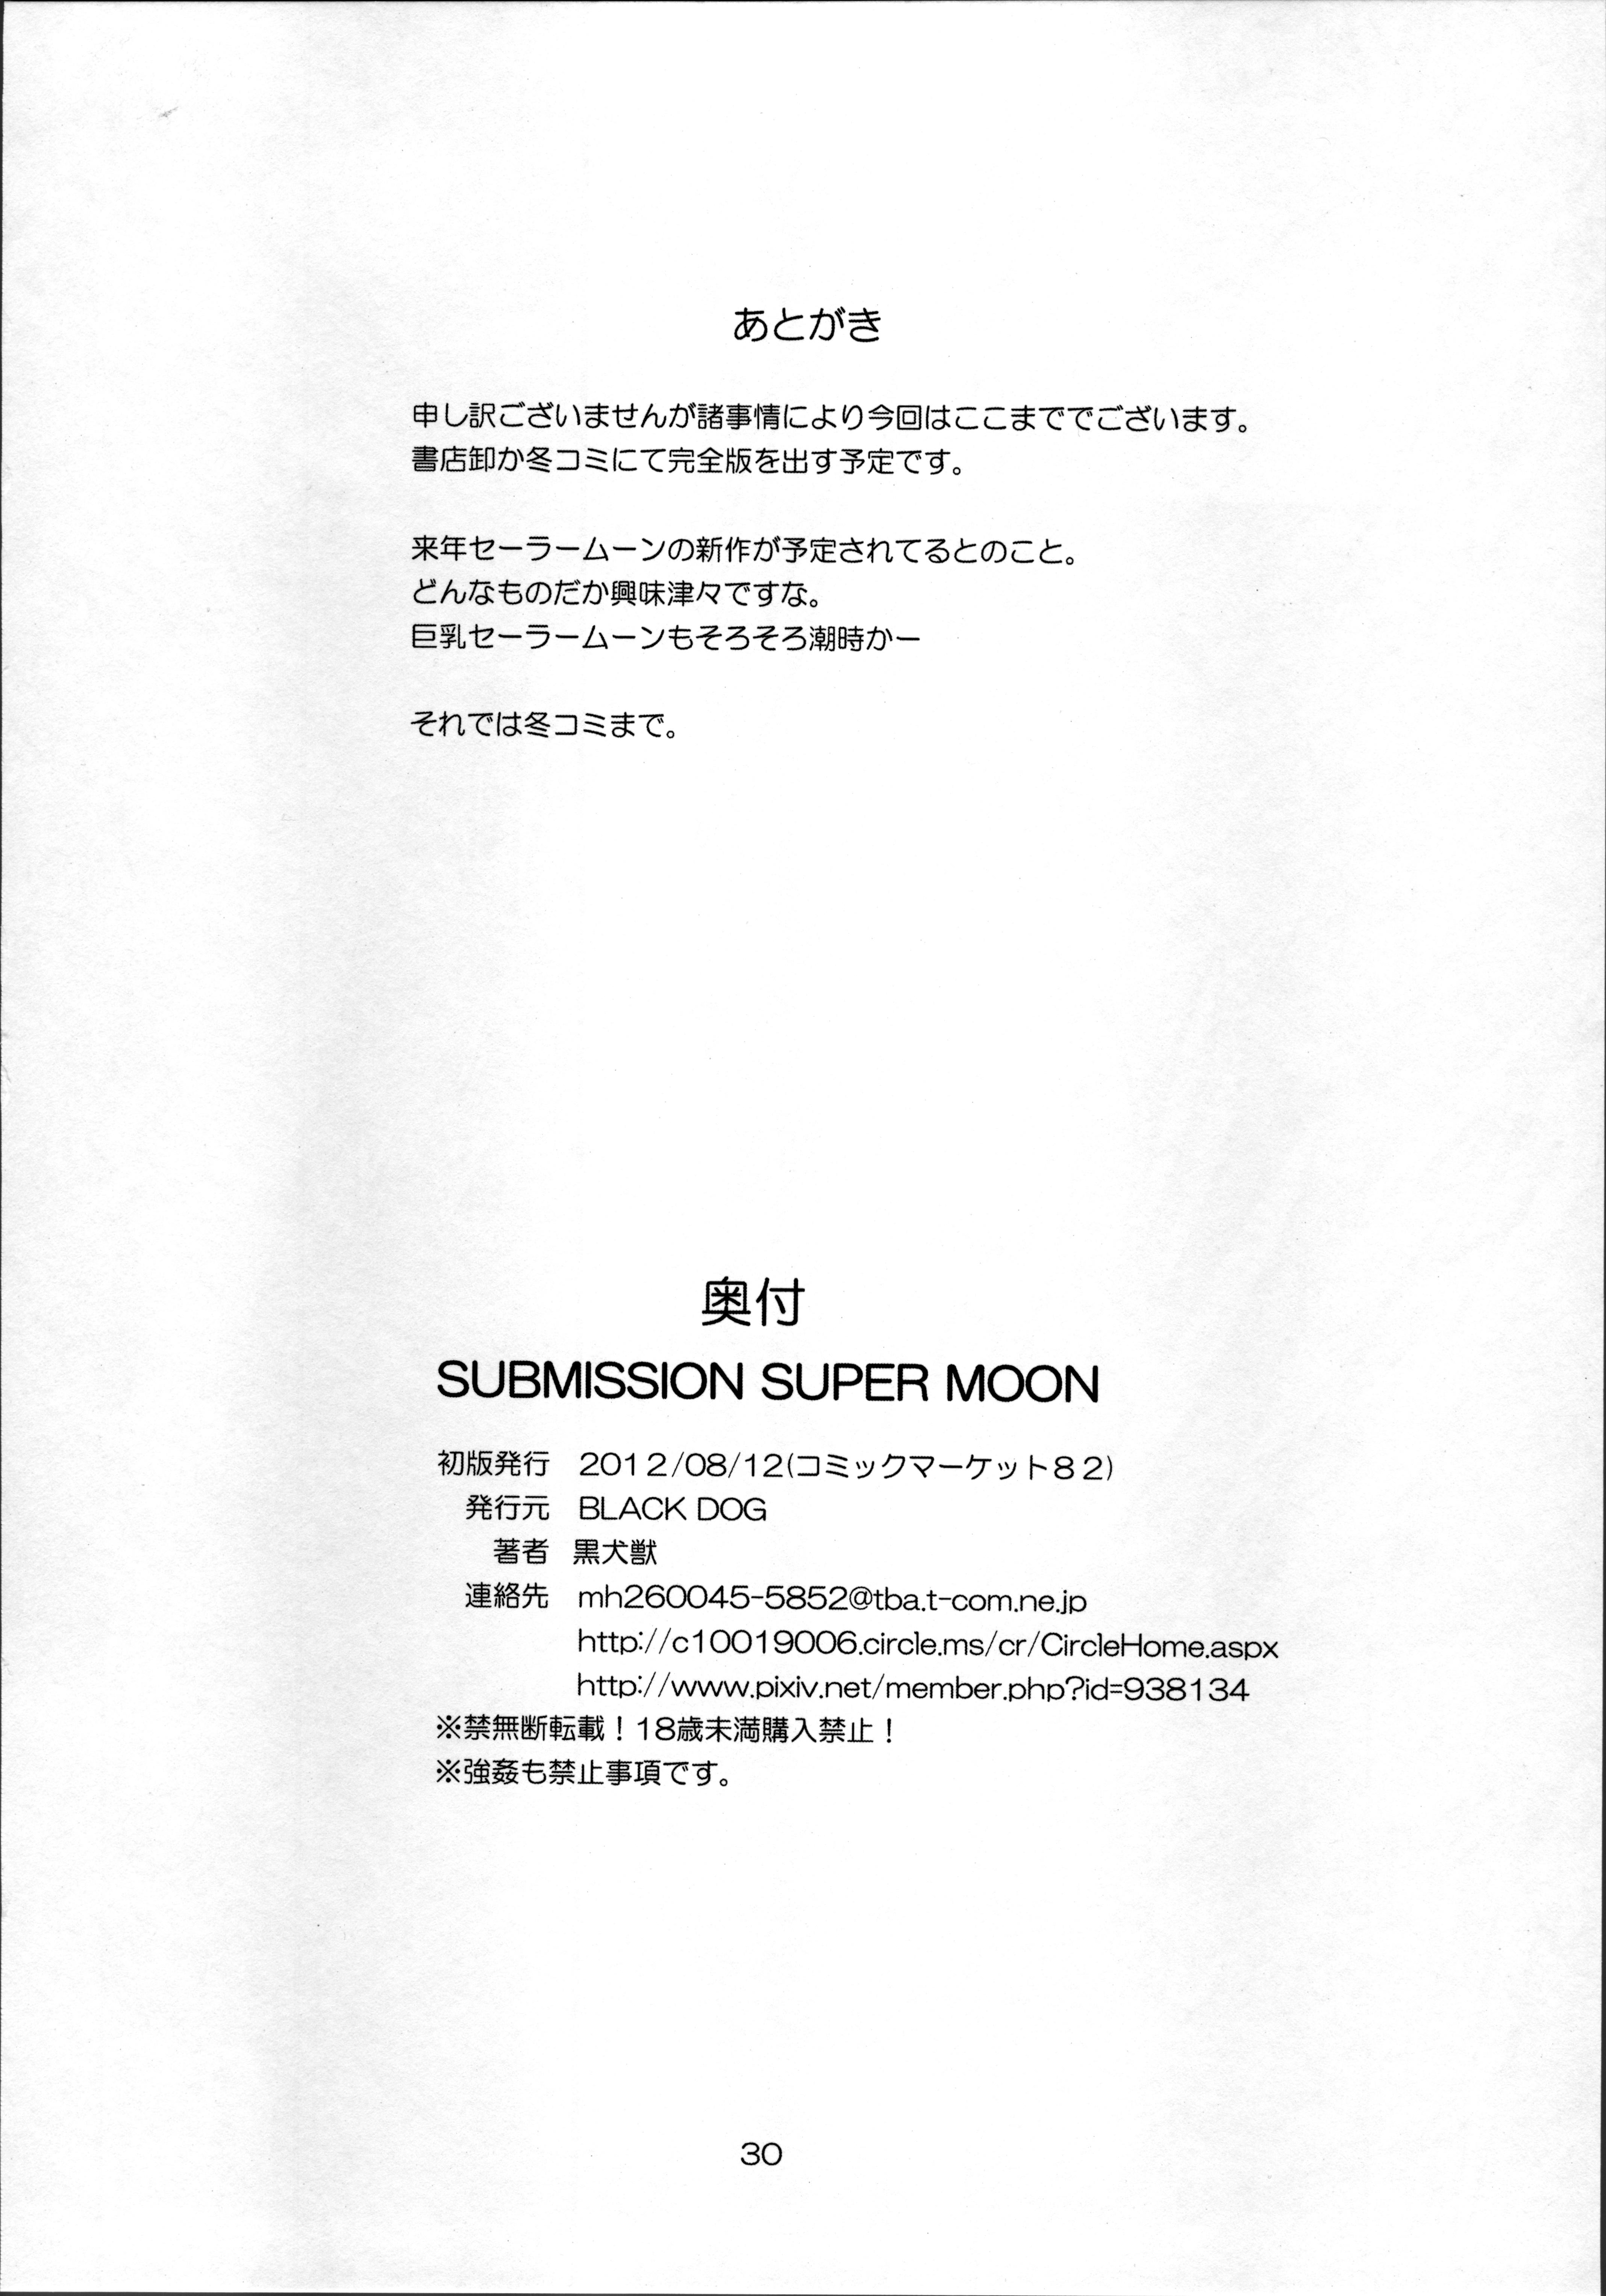 Mulata SUBMISSION-SUPER MOON Zanteiban - Sailor moon Doctor Sex - Page 30